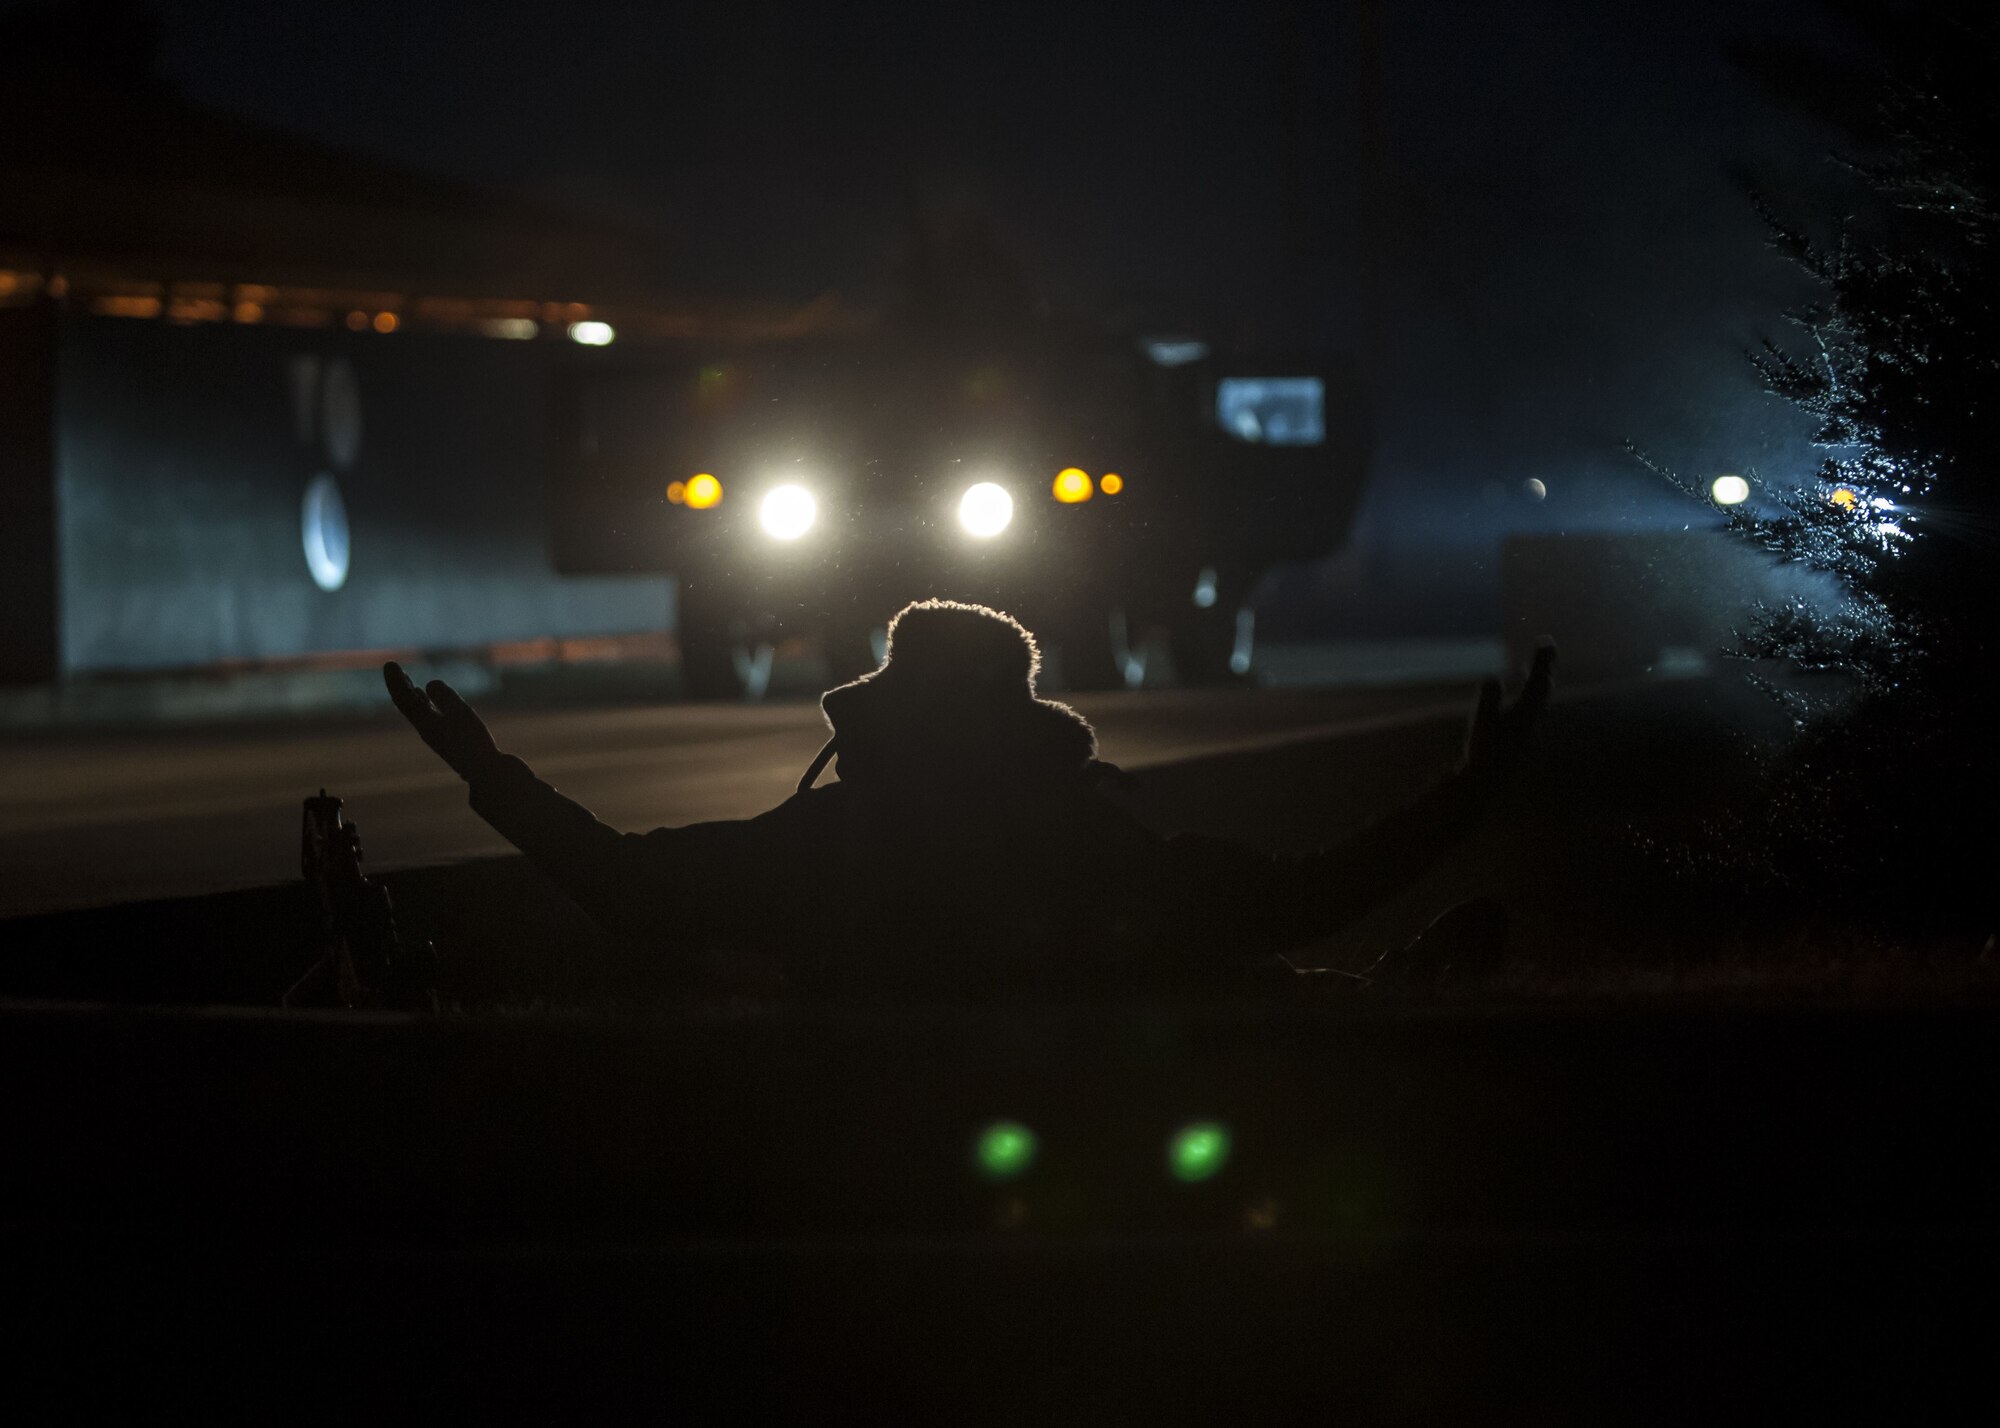 A U.S. Air Force Airman assigned to the 8th Security Forces Squadron acts as a member of an opposing force to simulate a base attack during exercise VIGILANT ACE 18 at Kunsan Air Base, Republic of Korea, Dec. 6, 2017. The week-long exercise tested the squadron’s ability to defend the base in a wartime scenario. Various simulated attacks on the installation enhanced the skills and training of Wolf Pack Airmen and their ability to respond to threats. (U.S. Air Force photo by Staff Sgt. Victoria H. Taylor)